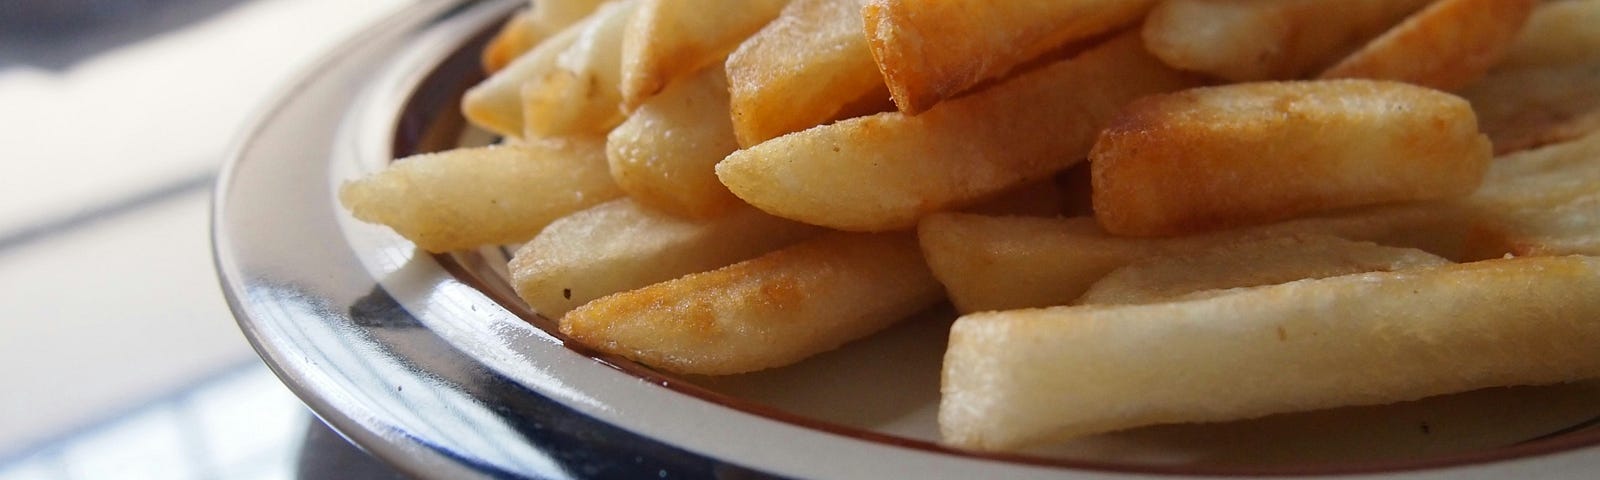 A blue and white plate covered in french fries.